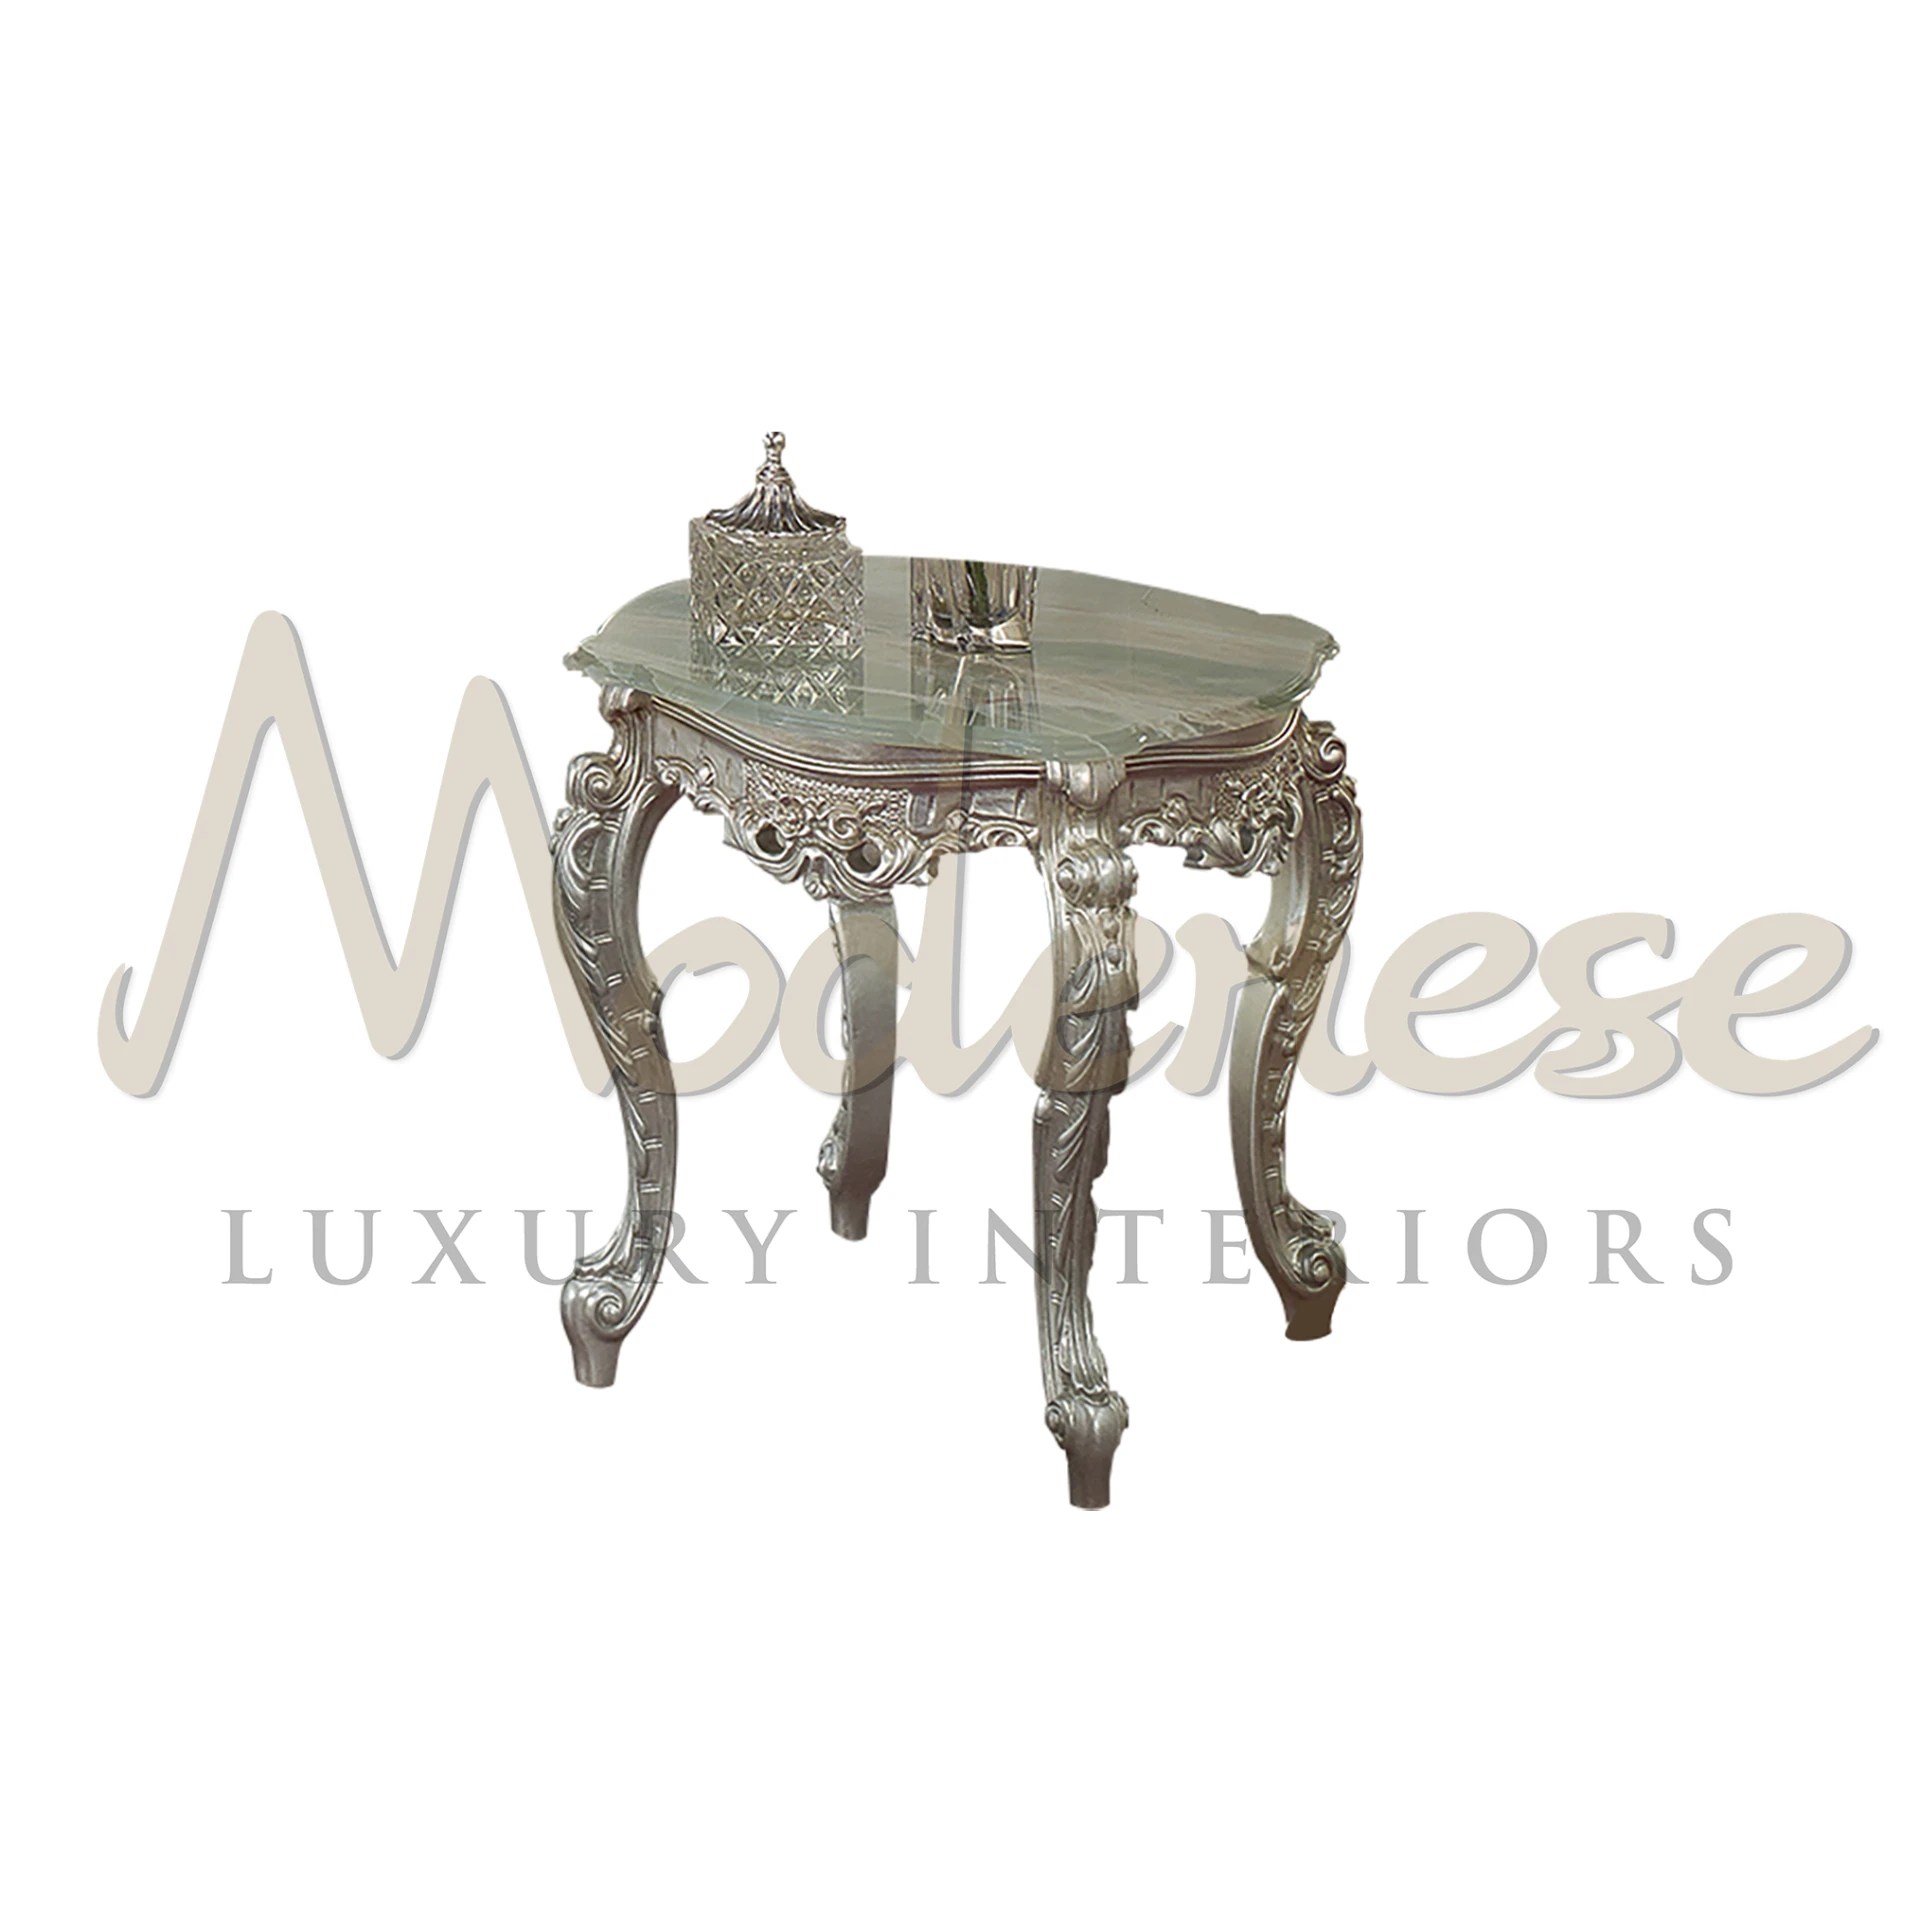 Elegant Silver Leaf Side Table with glass top, showcasing stability and sophistication for classic interior design.